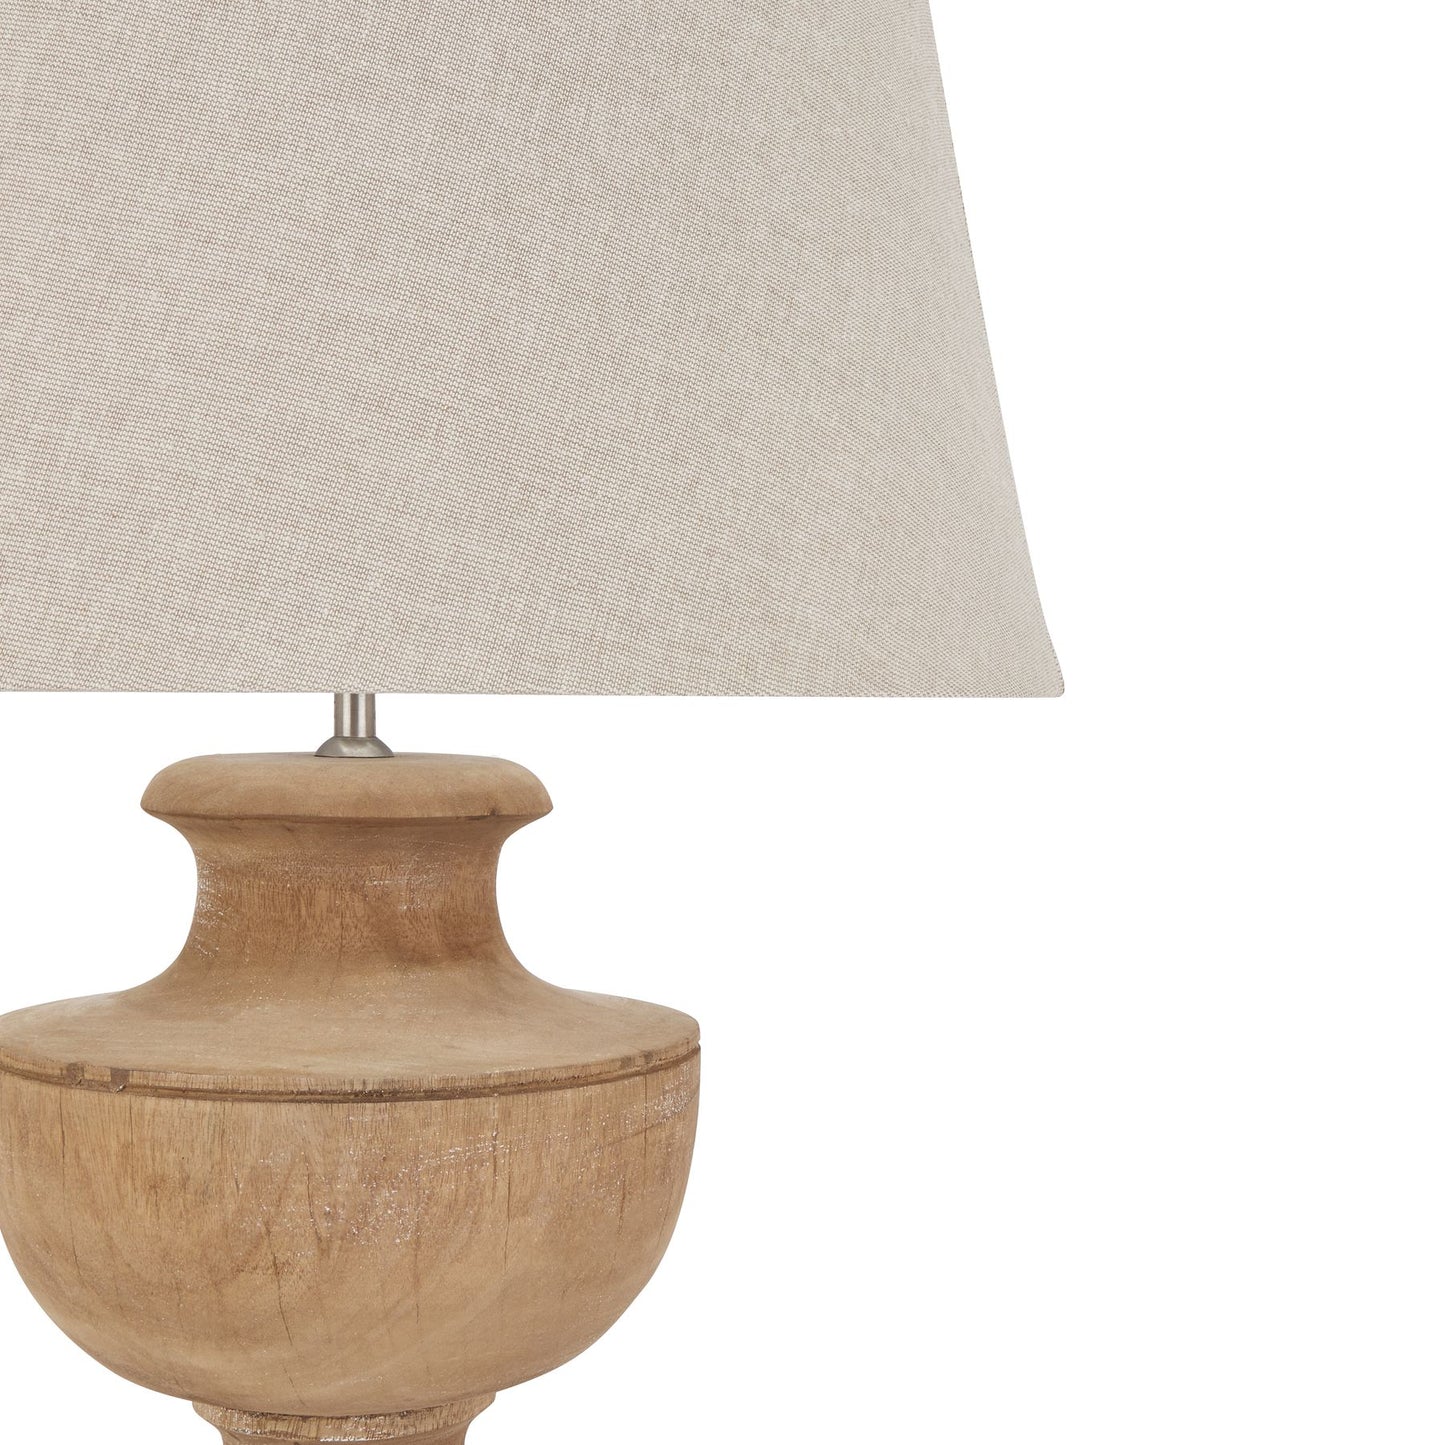 Carberry Light Wood Bowl Lamp